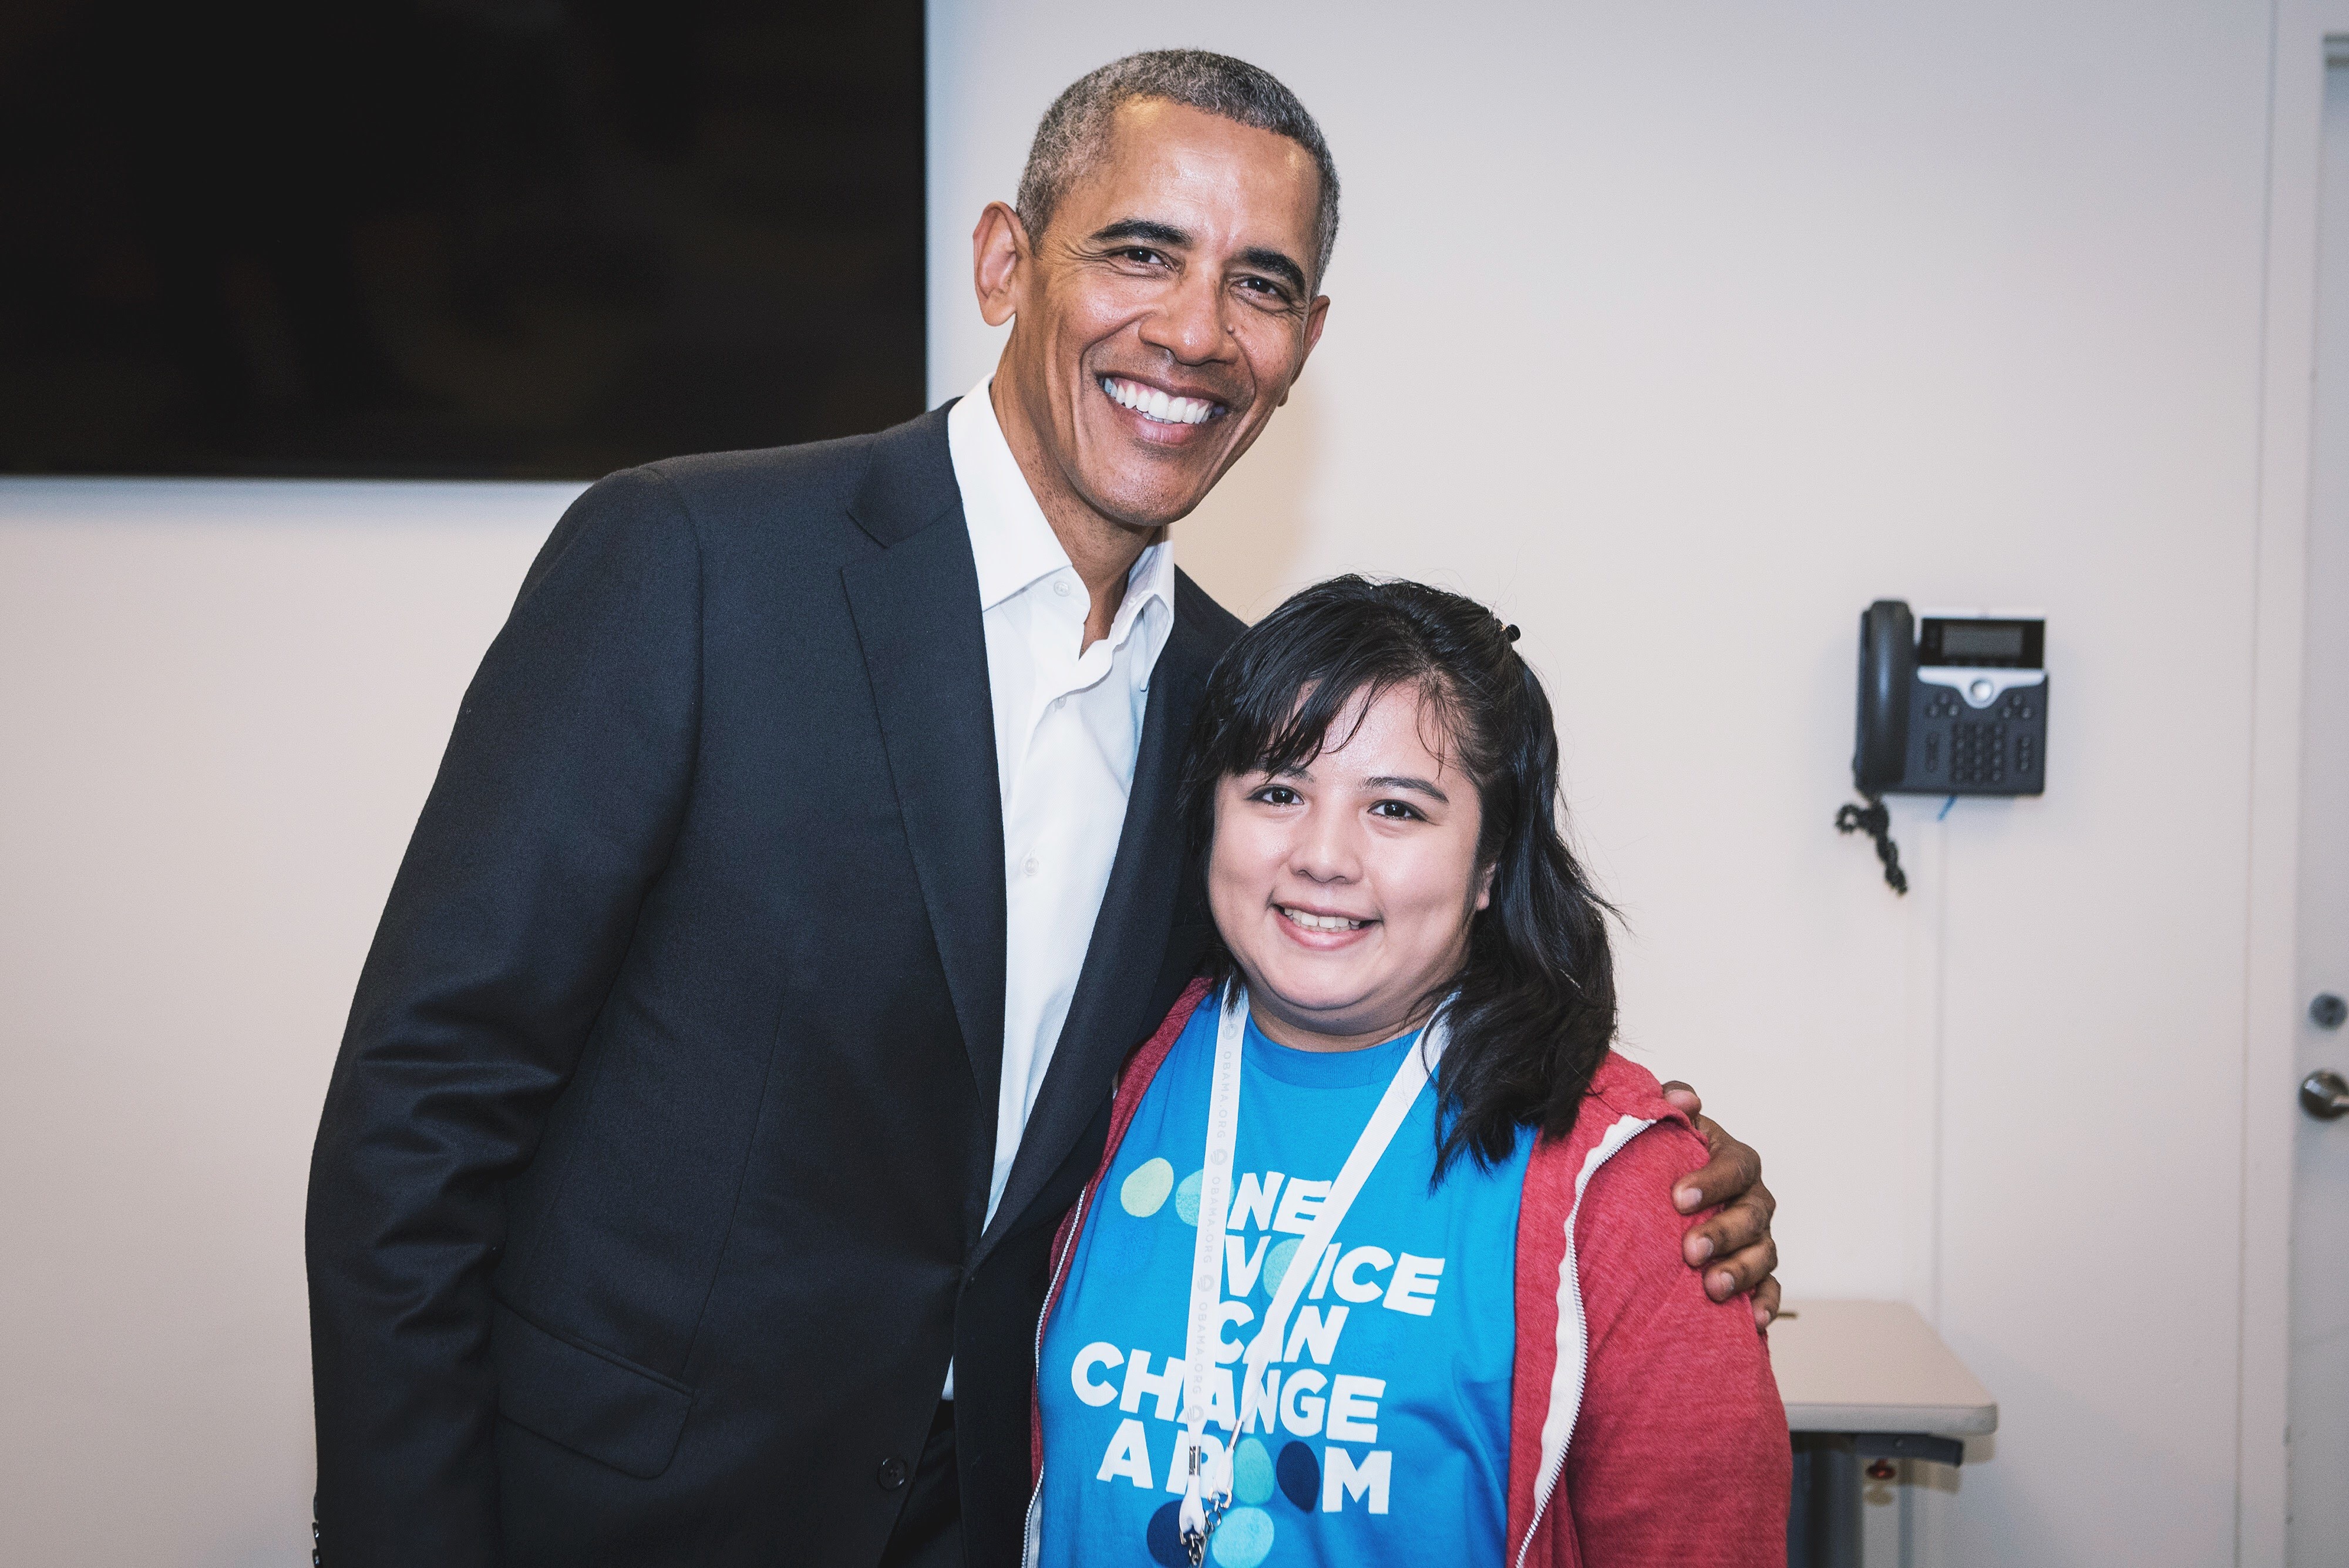 Cecilia posing for a photo with former president Barack Obama